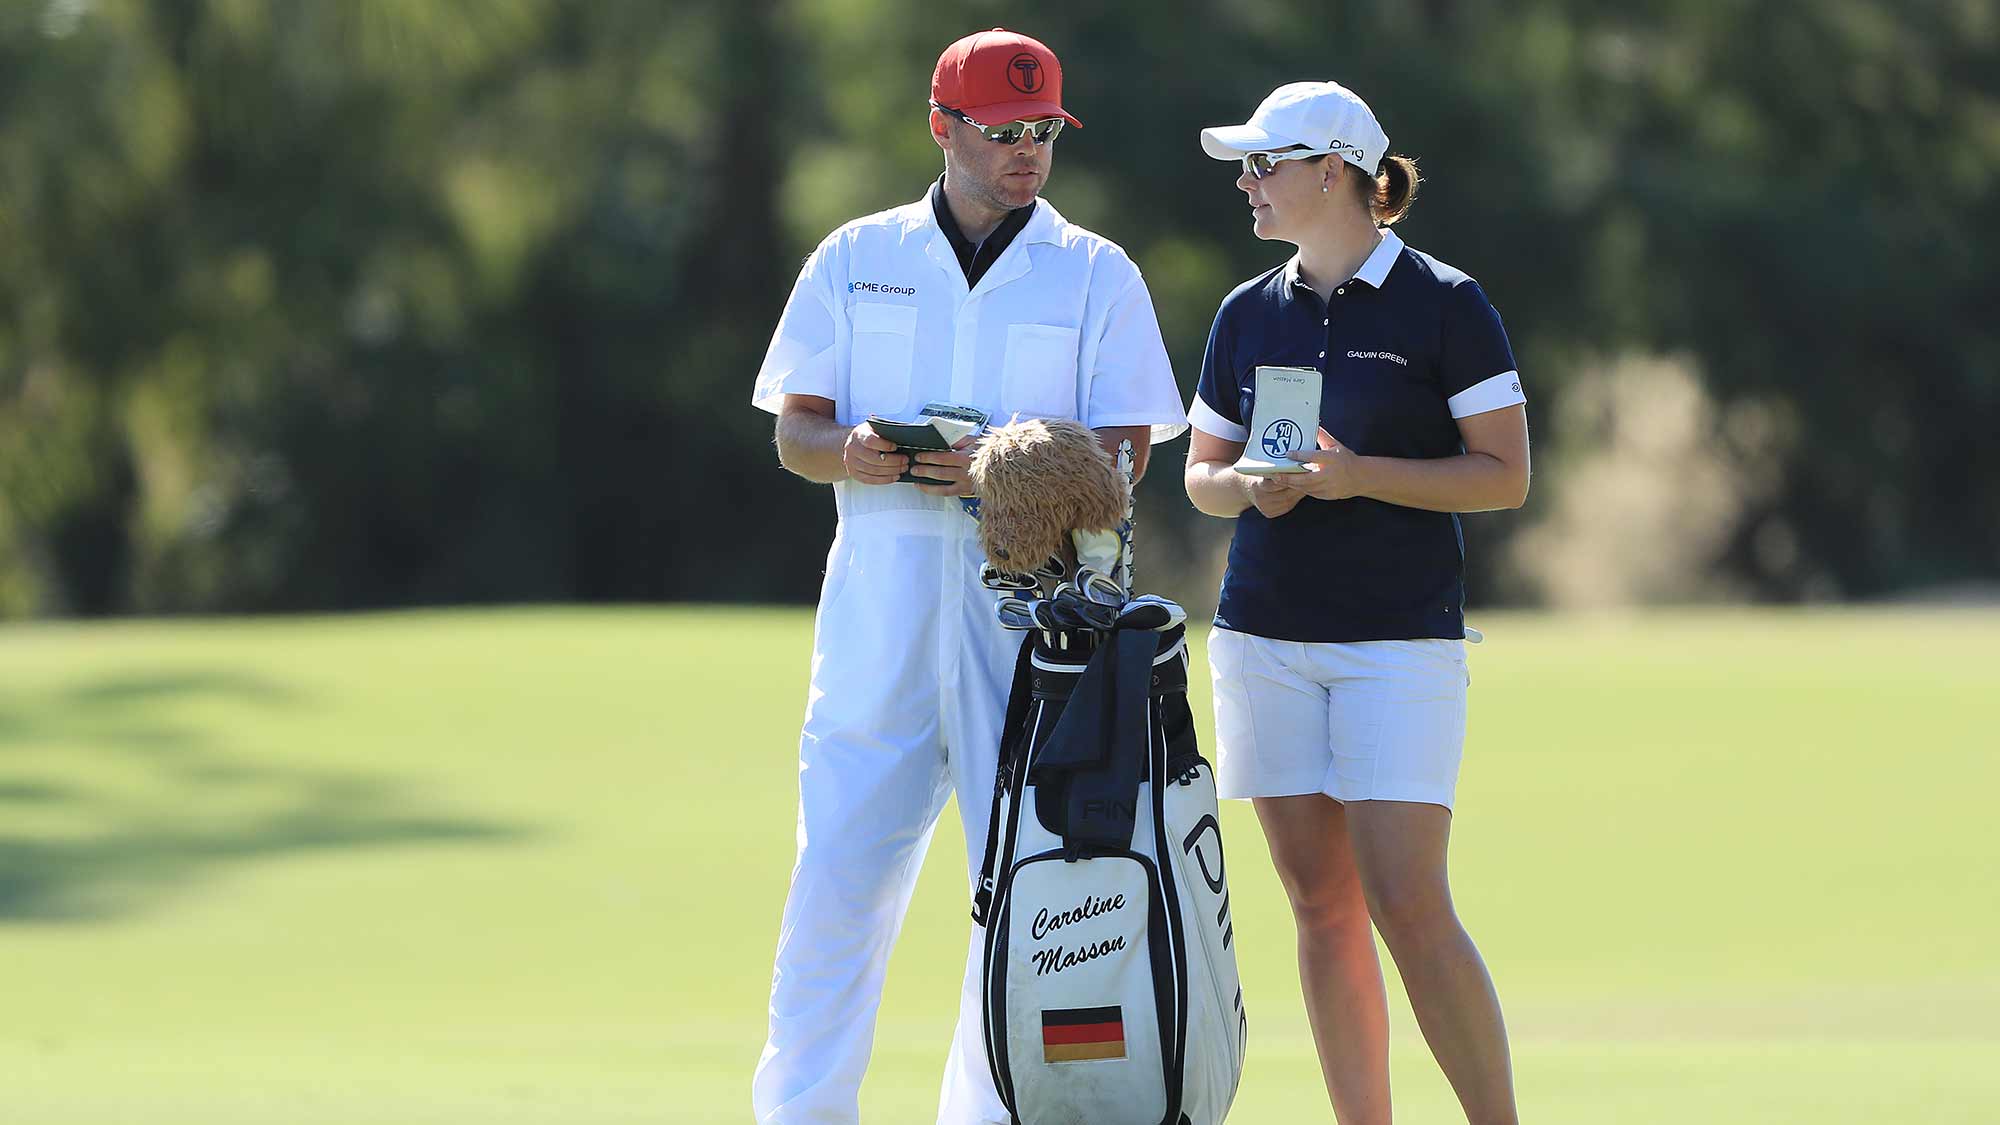  Caroline Masson of Germany talks with her caddie on the second hole during the second round of the CME Group Tour Championship at Tiburon Golf Club on November 22, 2019 in Naples, Florida